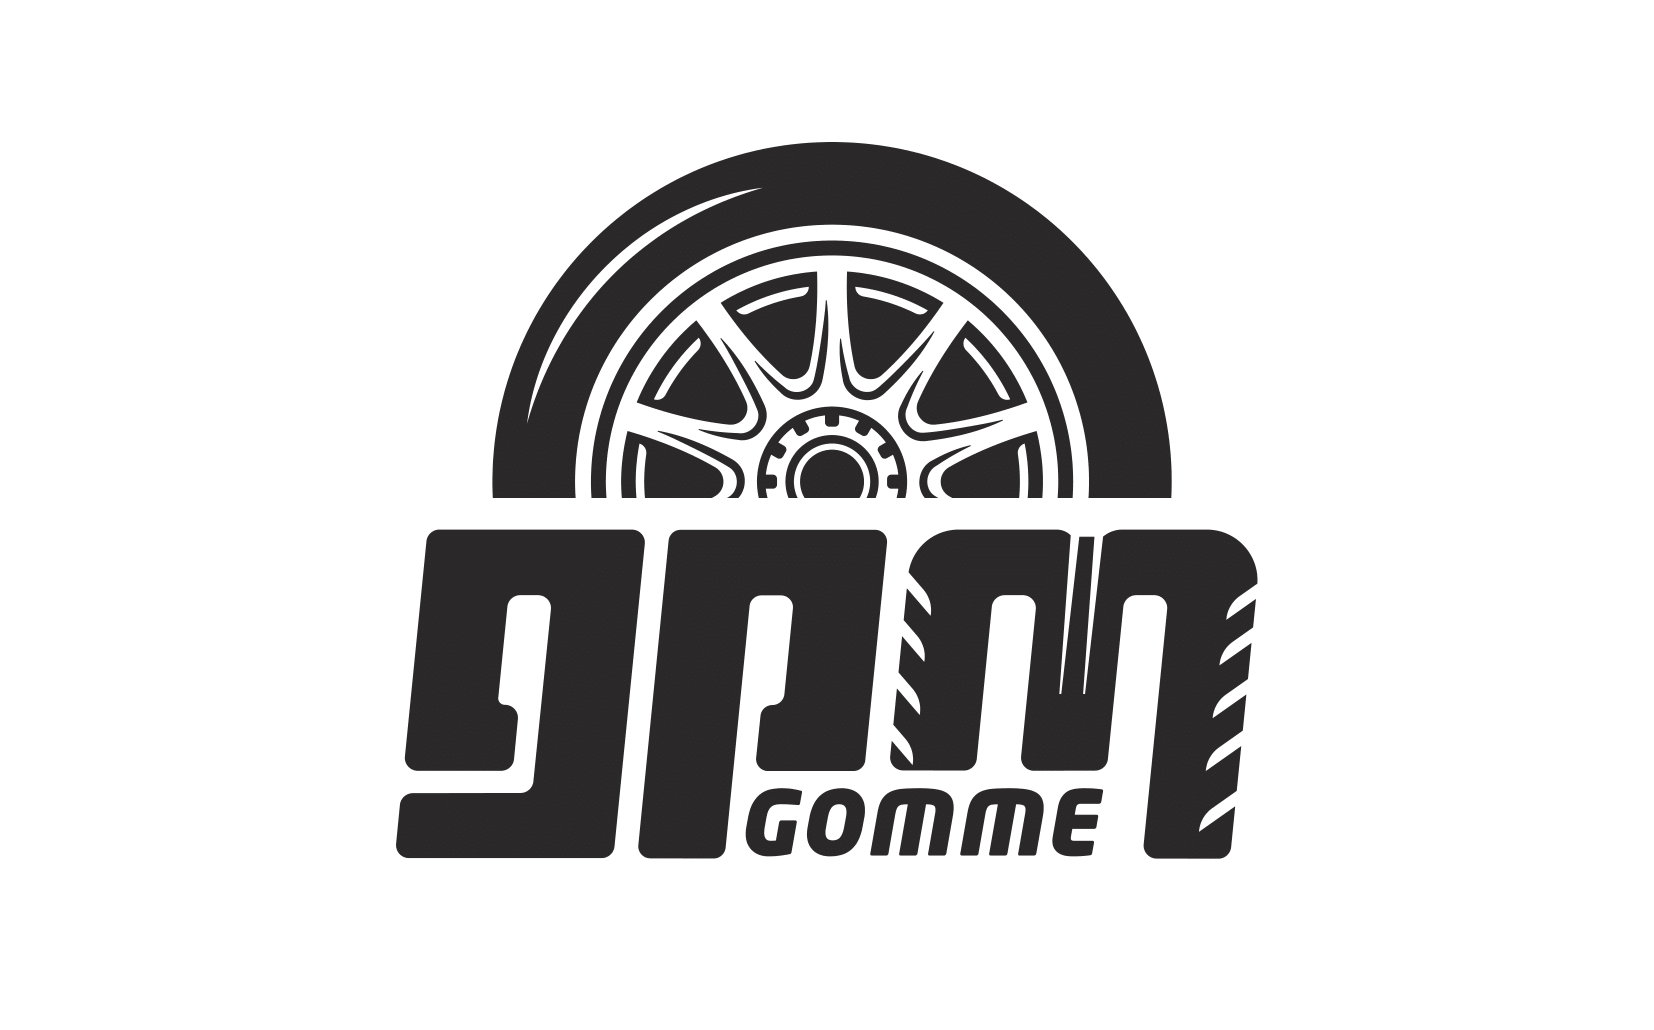 GPM GOMME LOGO